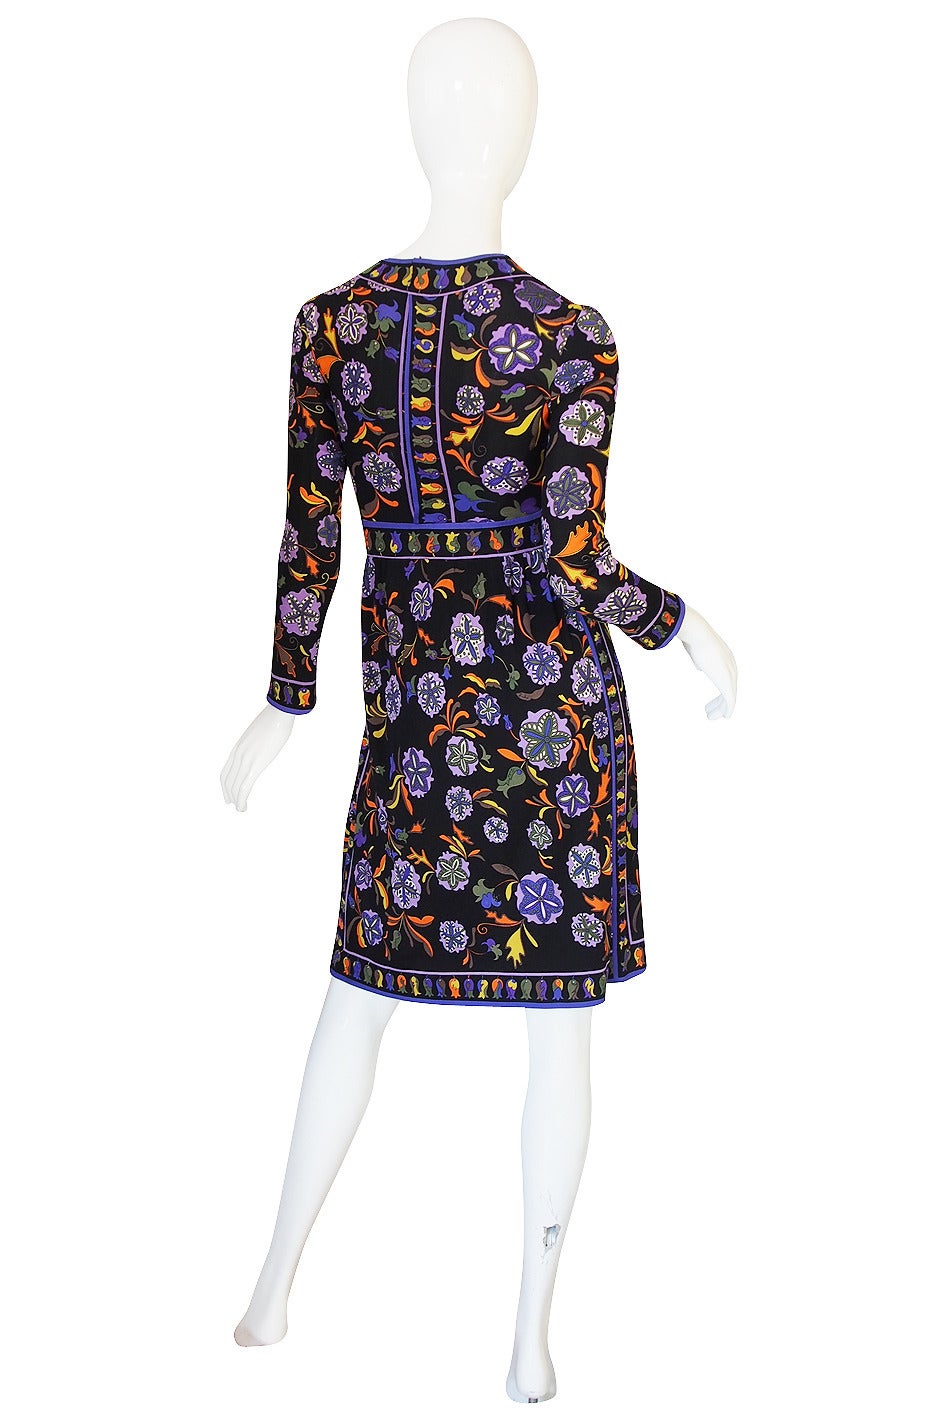 What a beautiful Pucci dress that is constructed from one of his signature silk jerseys with a bright pattern in a mix of colors that just pops off the black backdrop. The bodice skims over the bust to the waist and the waist is accented by a